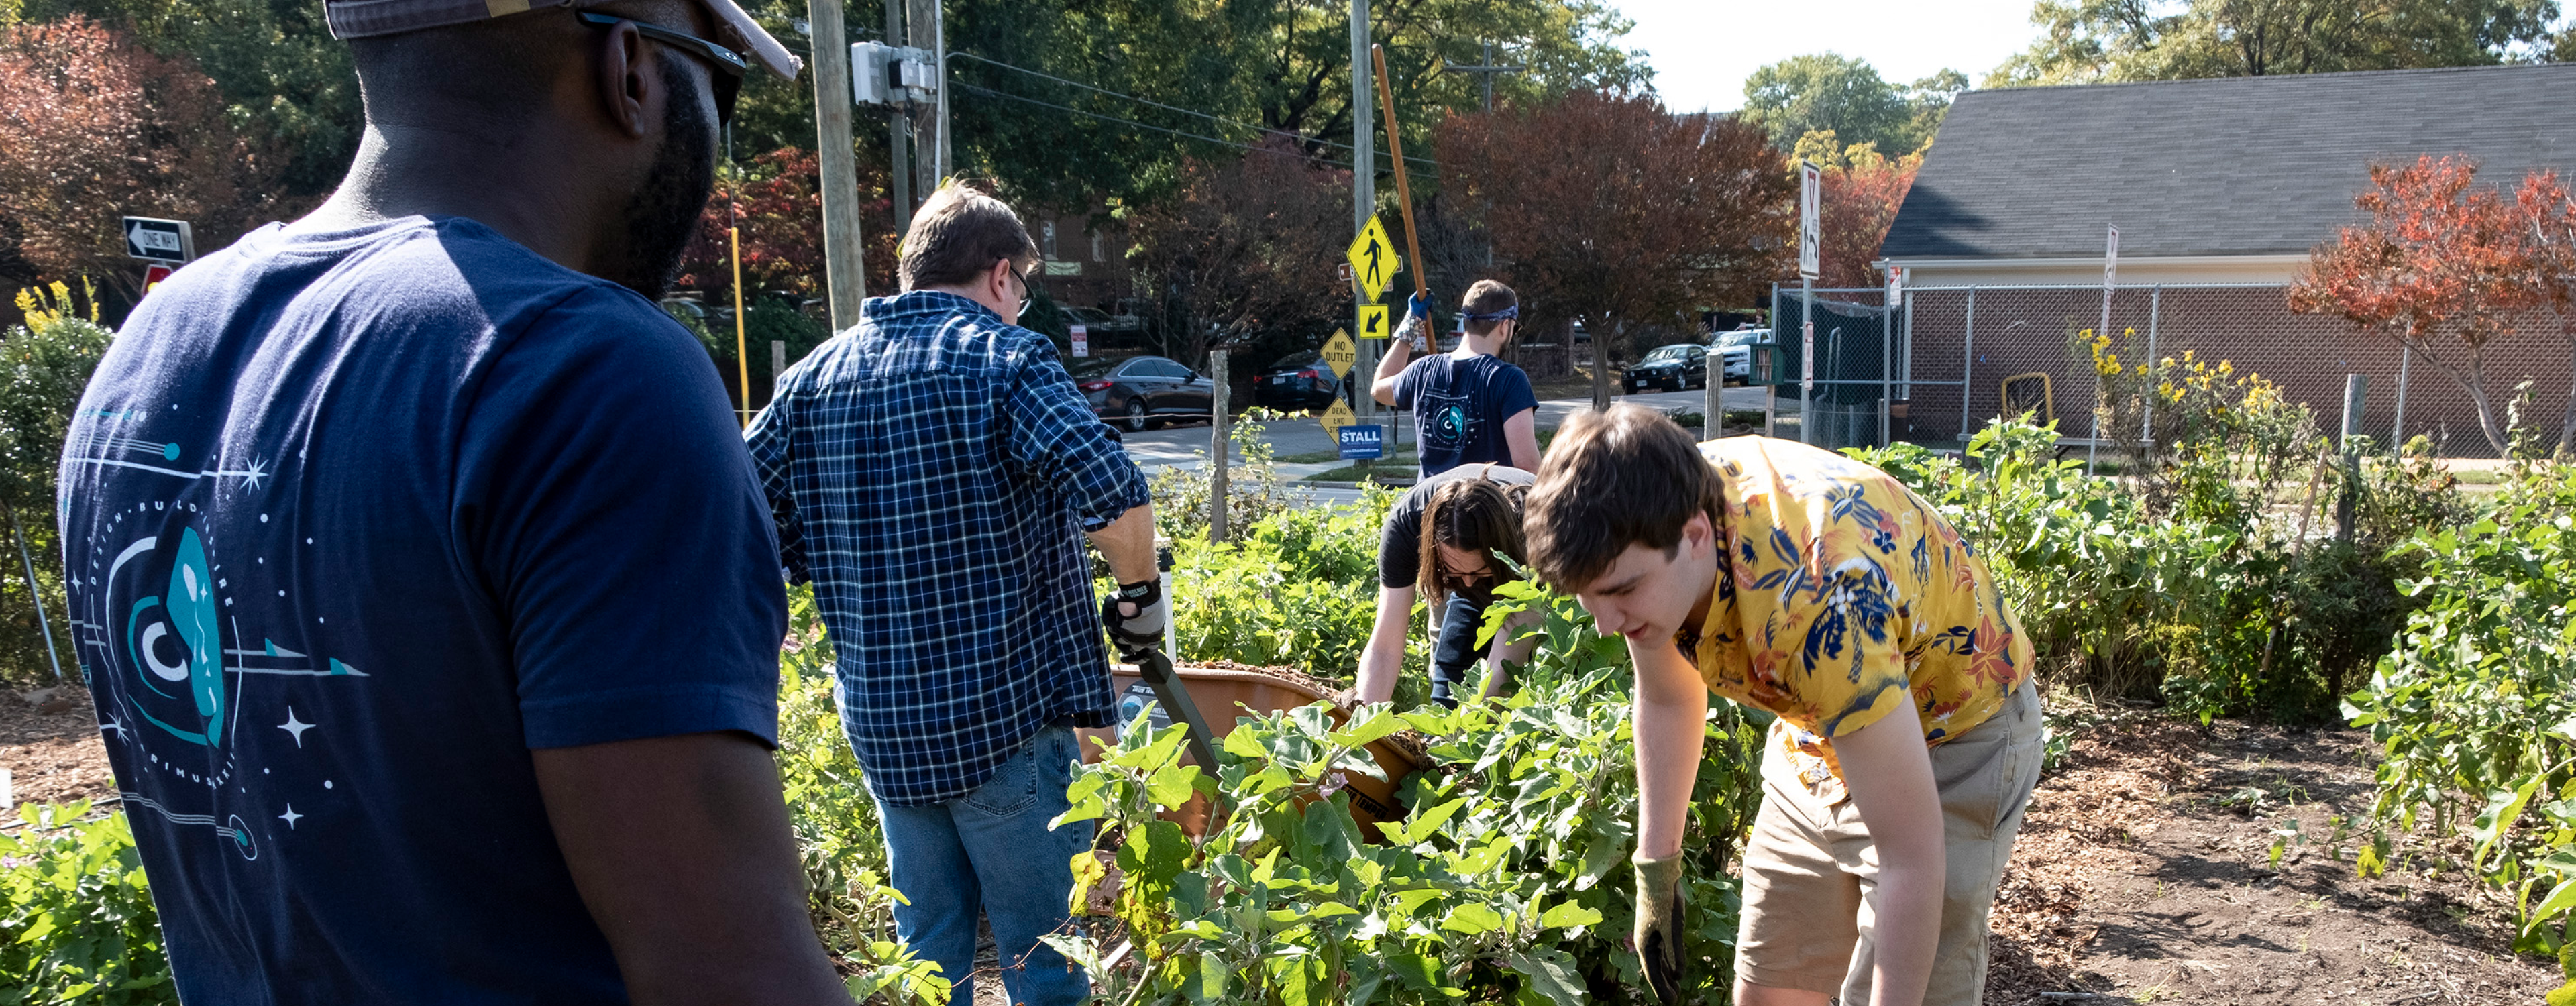 Carimus Employee Engagement Activity at Raleigh City Farm